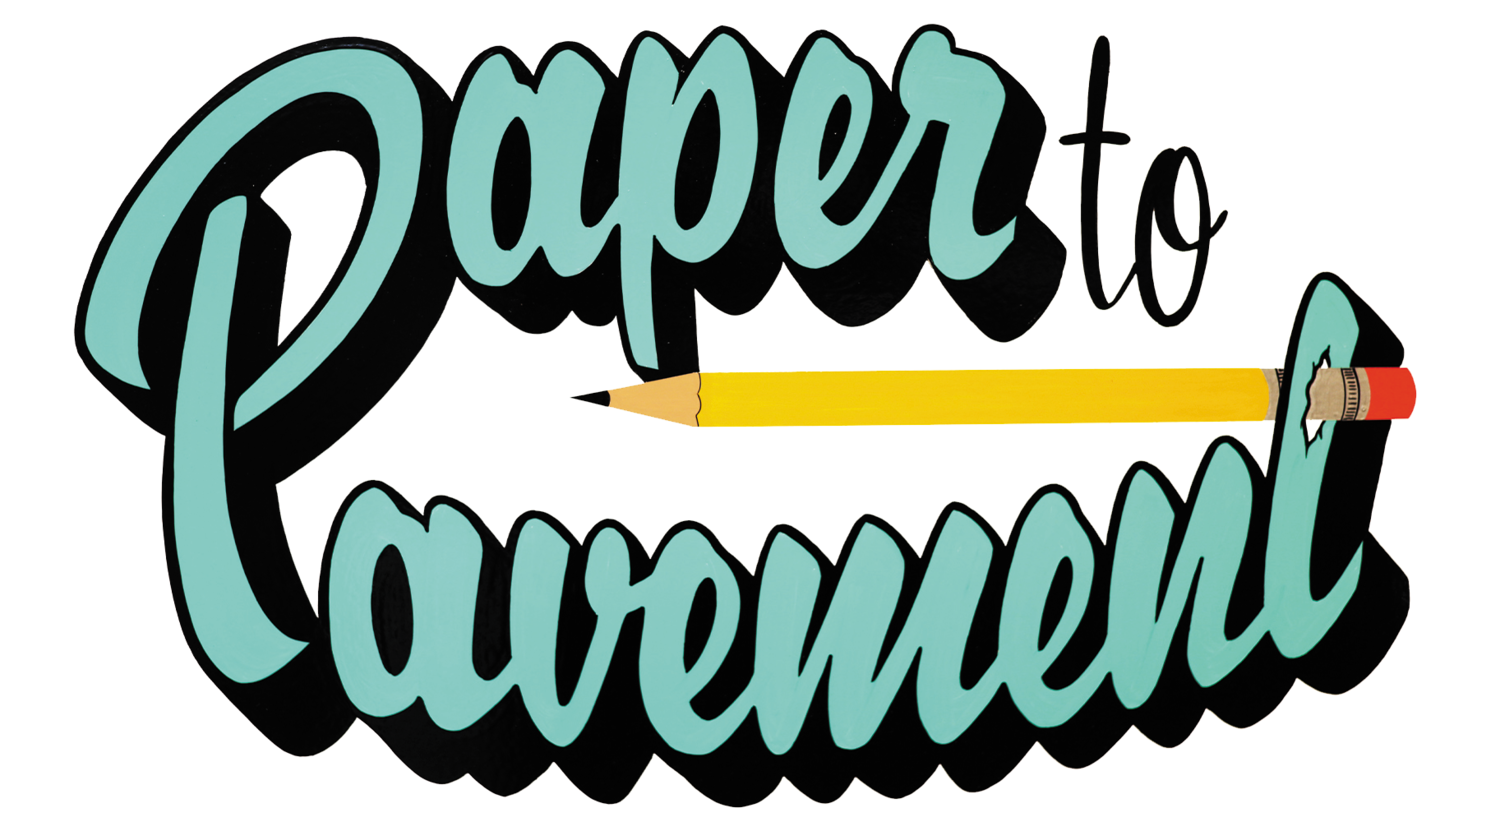 Paper to Pavement